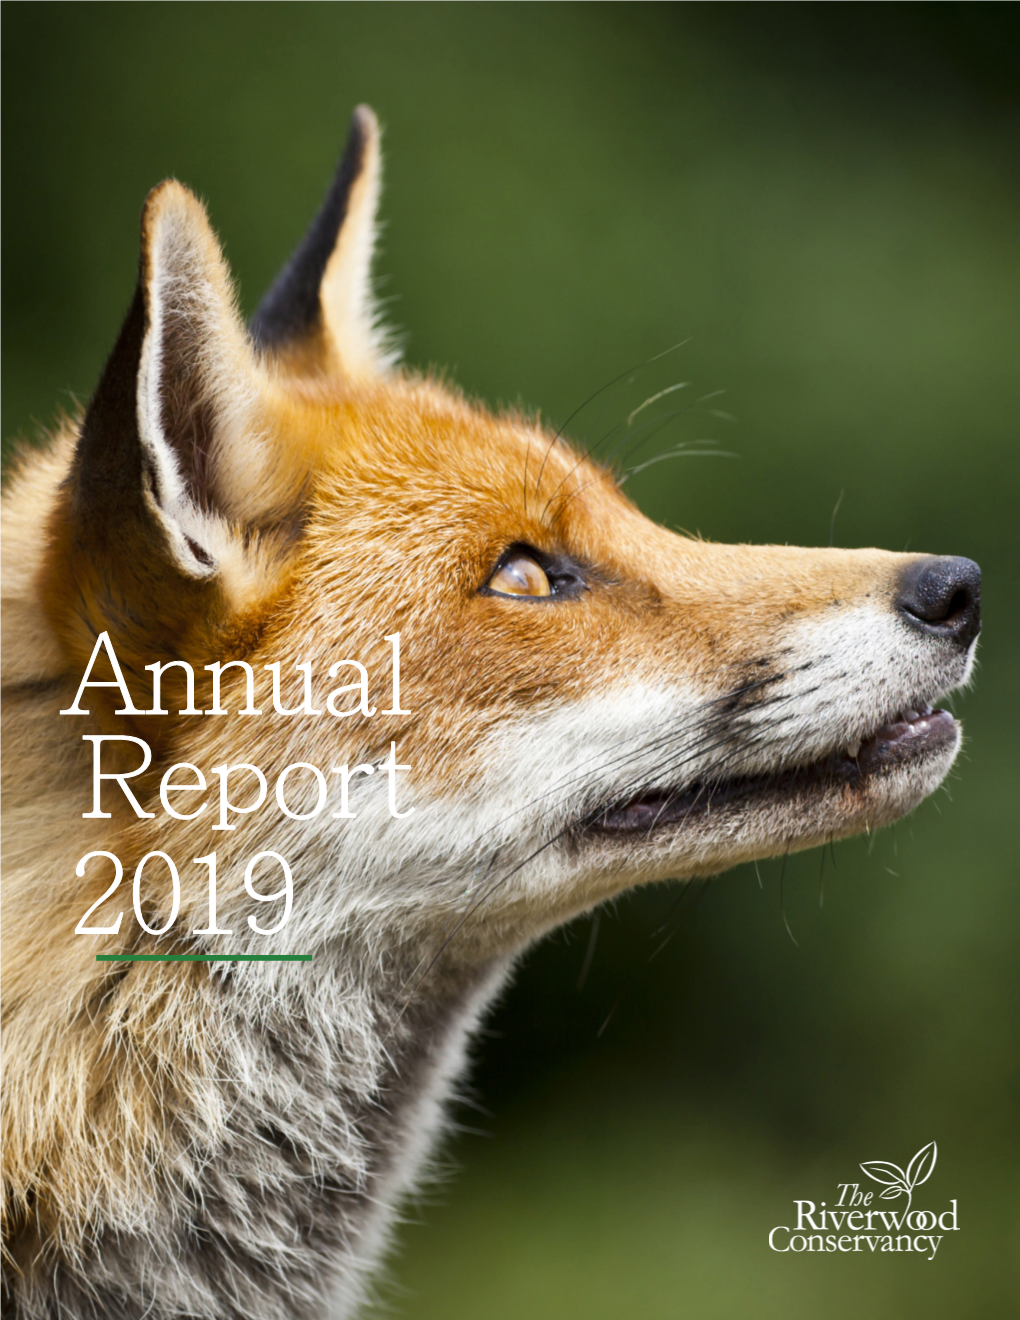 Annual Report 2019 @Yourriverwood Keeping the Natural World in Focus